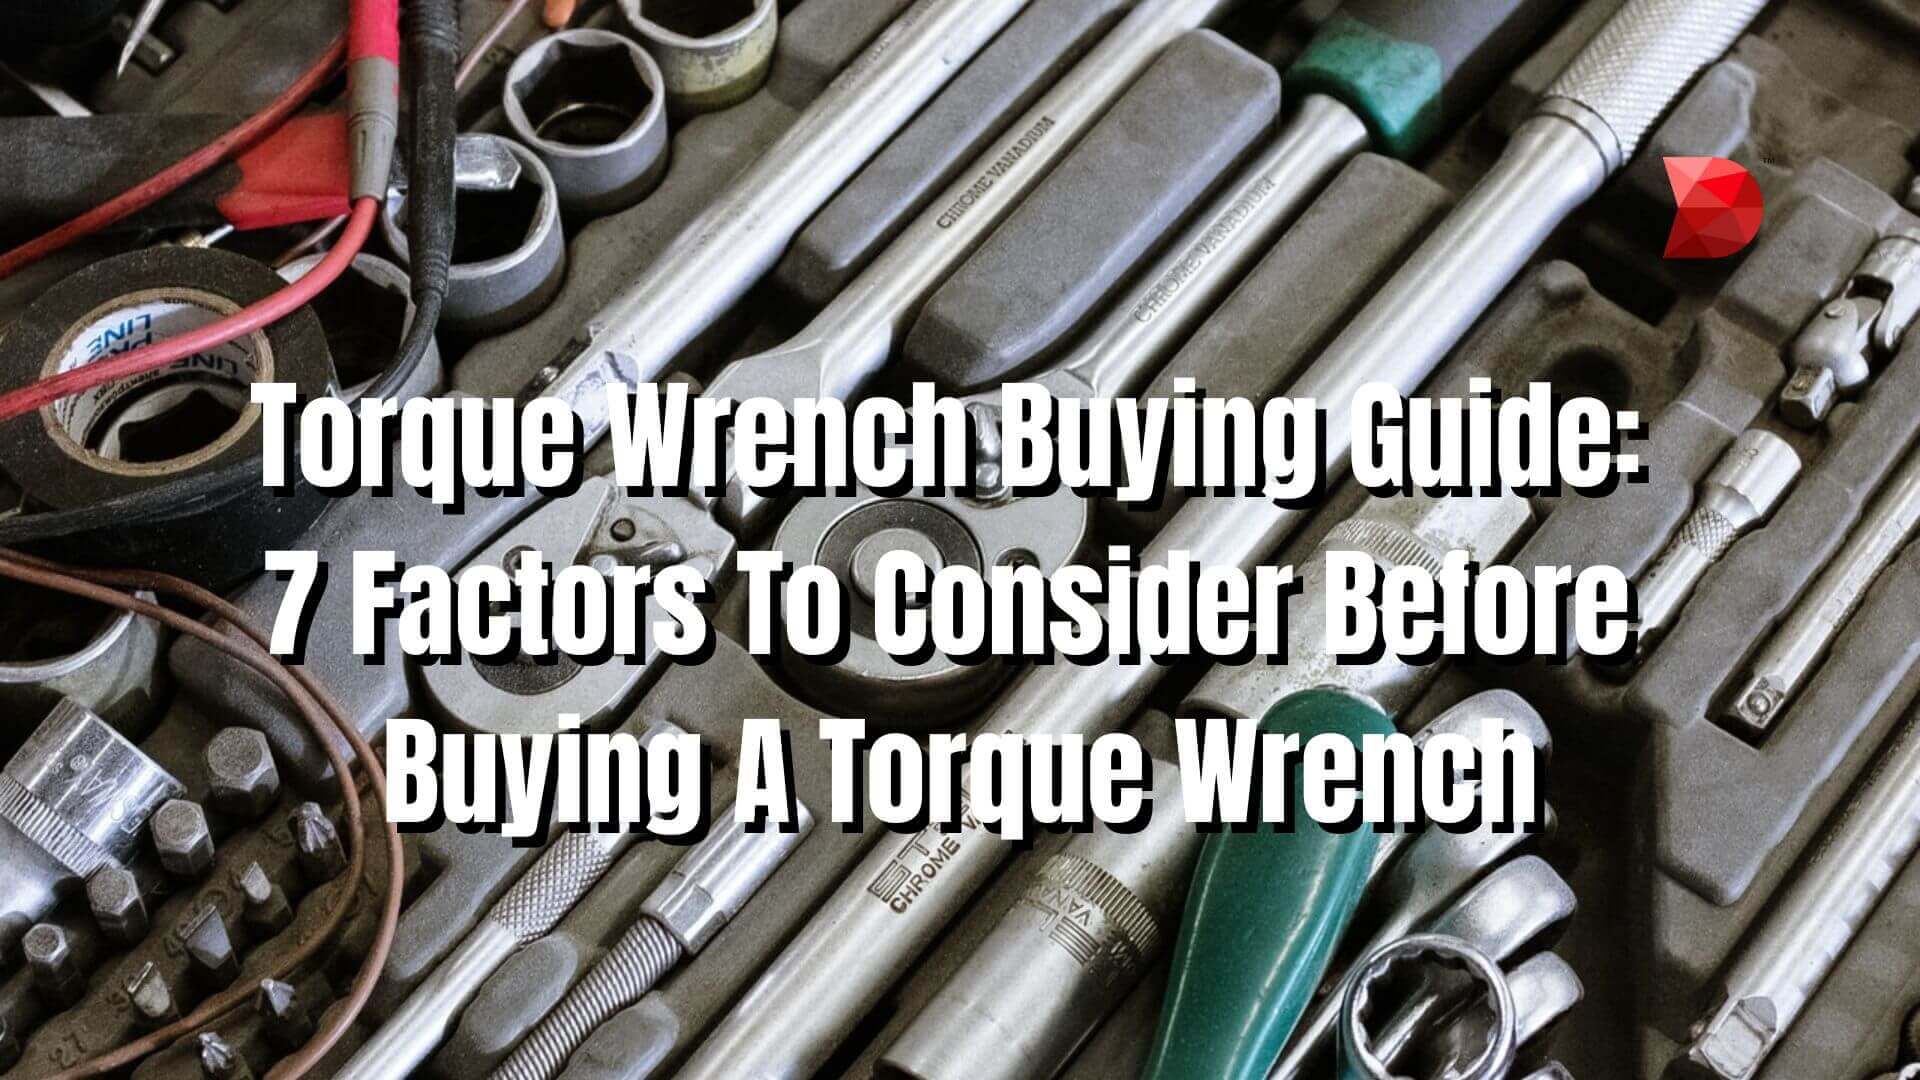 Torque Wrench Buying Guide 7 Factors To Consider Before Buying A Torque Wrench